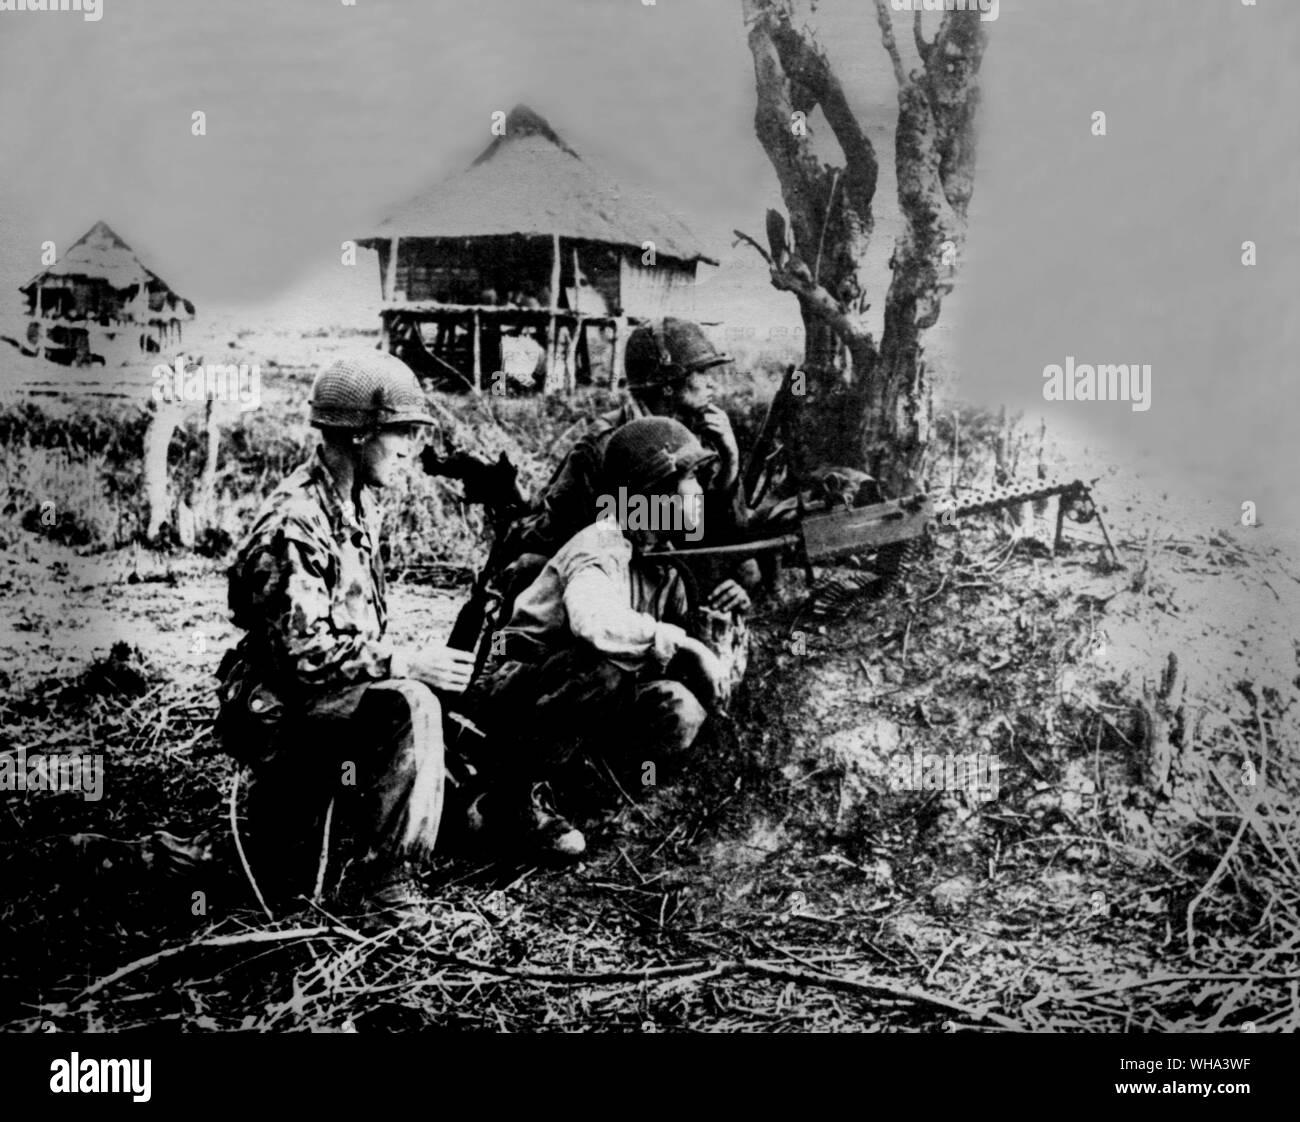 Dien Bien Phu 1954 French High Resolution Stock Photography and Images - Alamy